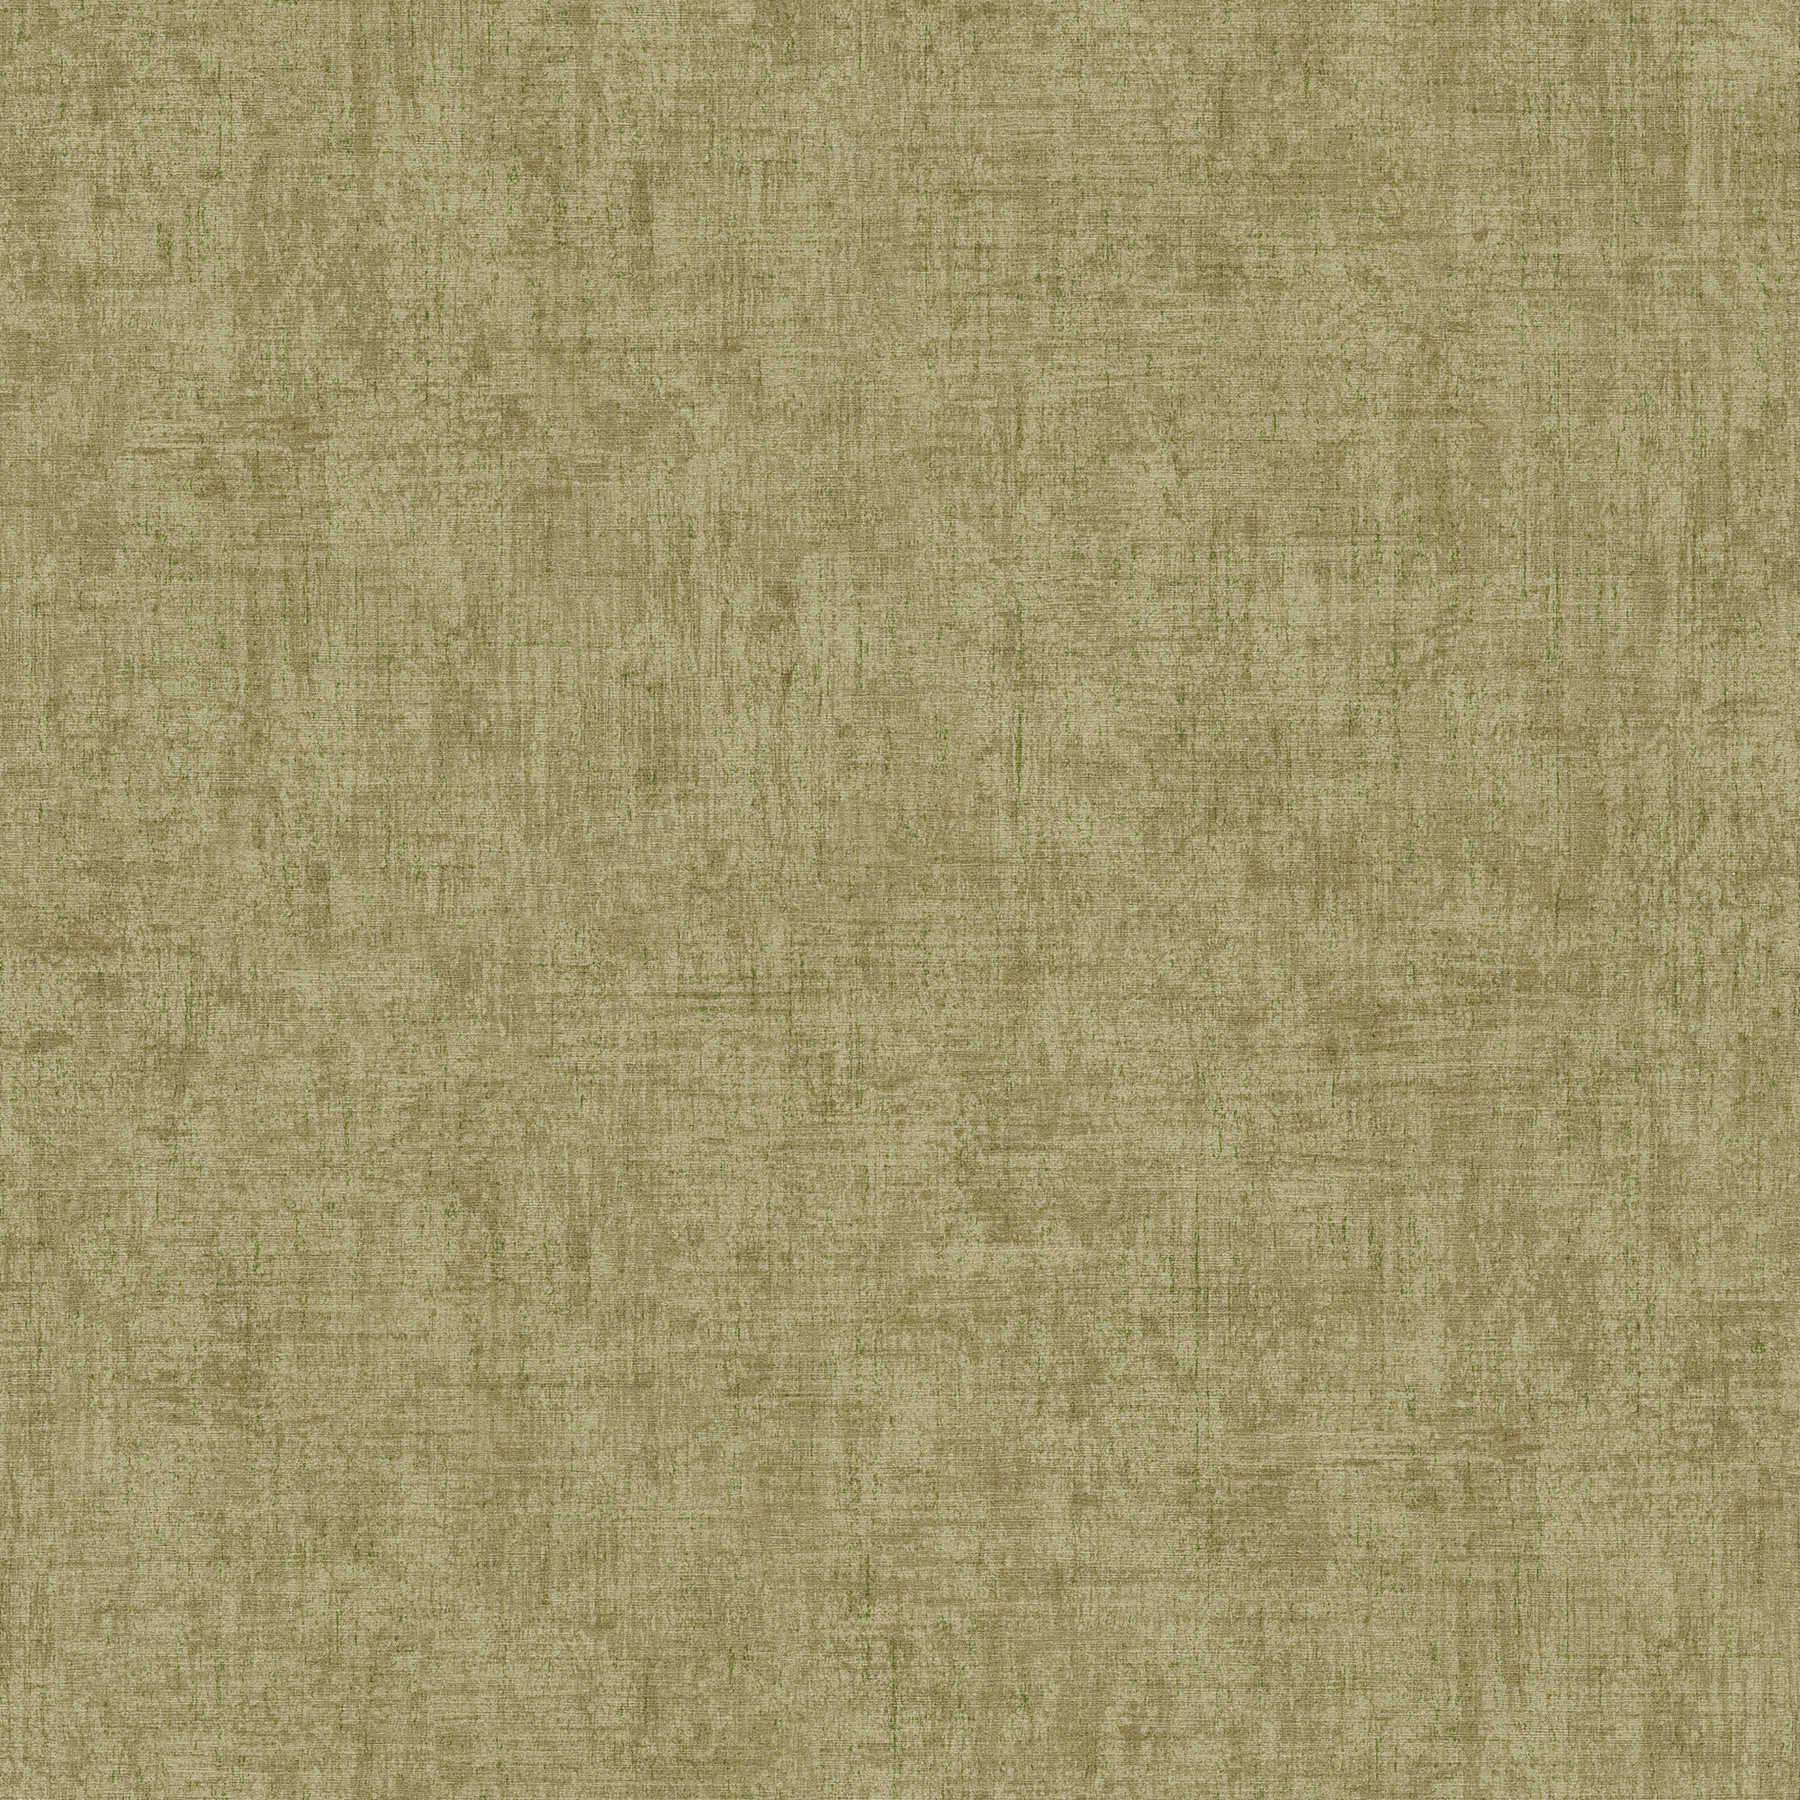 Olive green wallpaper mottled, matte & with texture pattern
